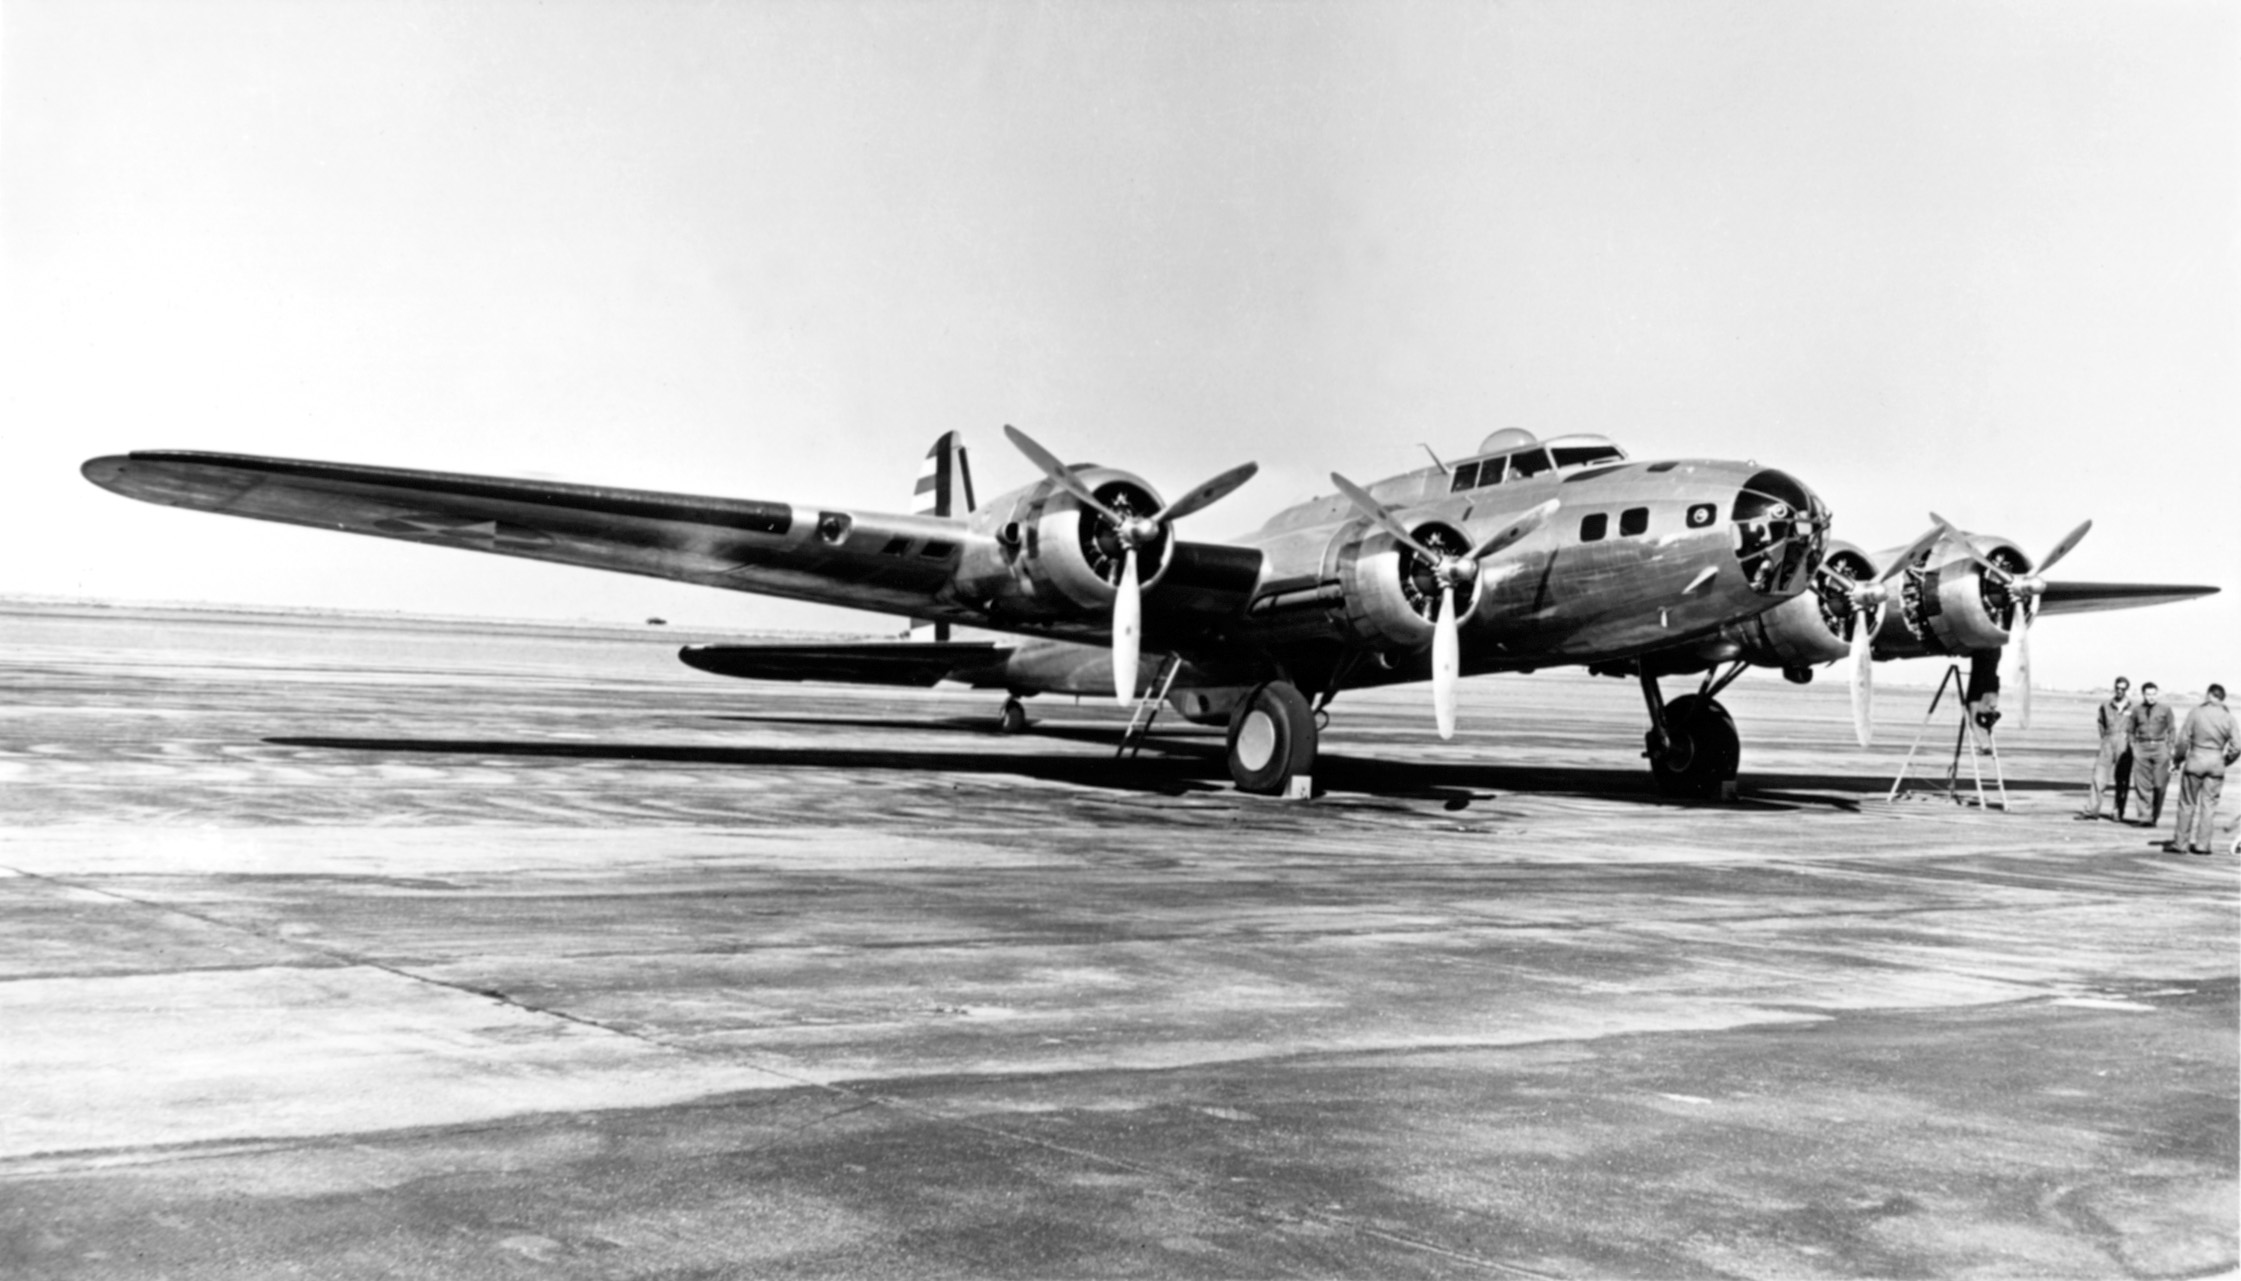 A Boeing B-17D Flying Fortress sits on the tarmac at Clark Field in 1941. B-17s and other heavy bombers gave U.S. forces the ability to strike targets in China and Formosa.